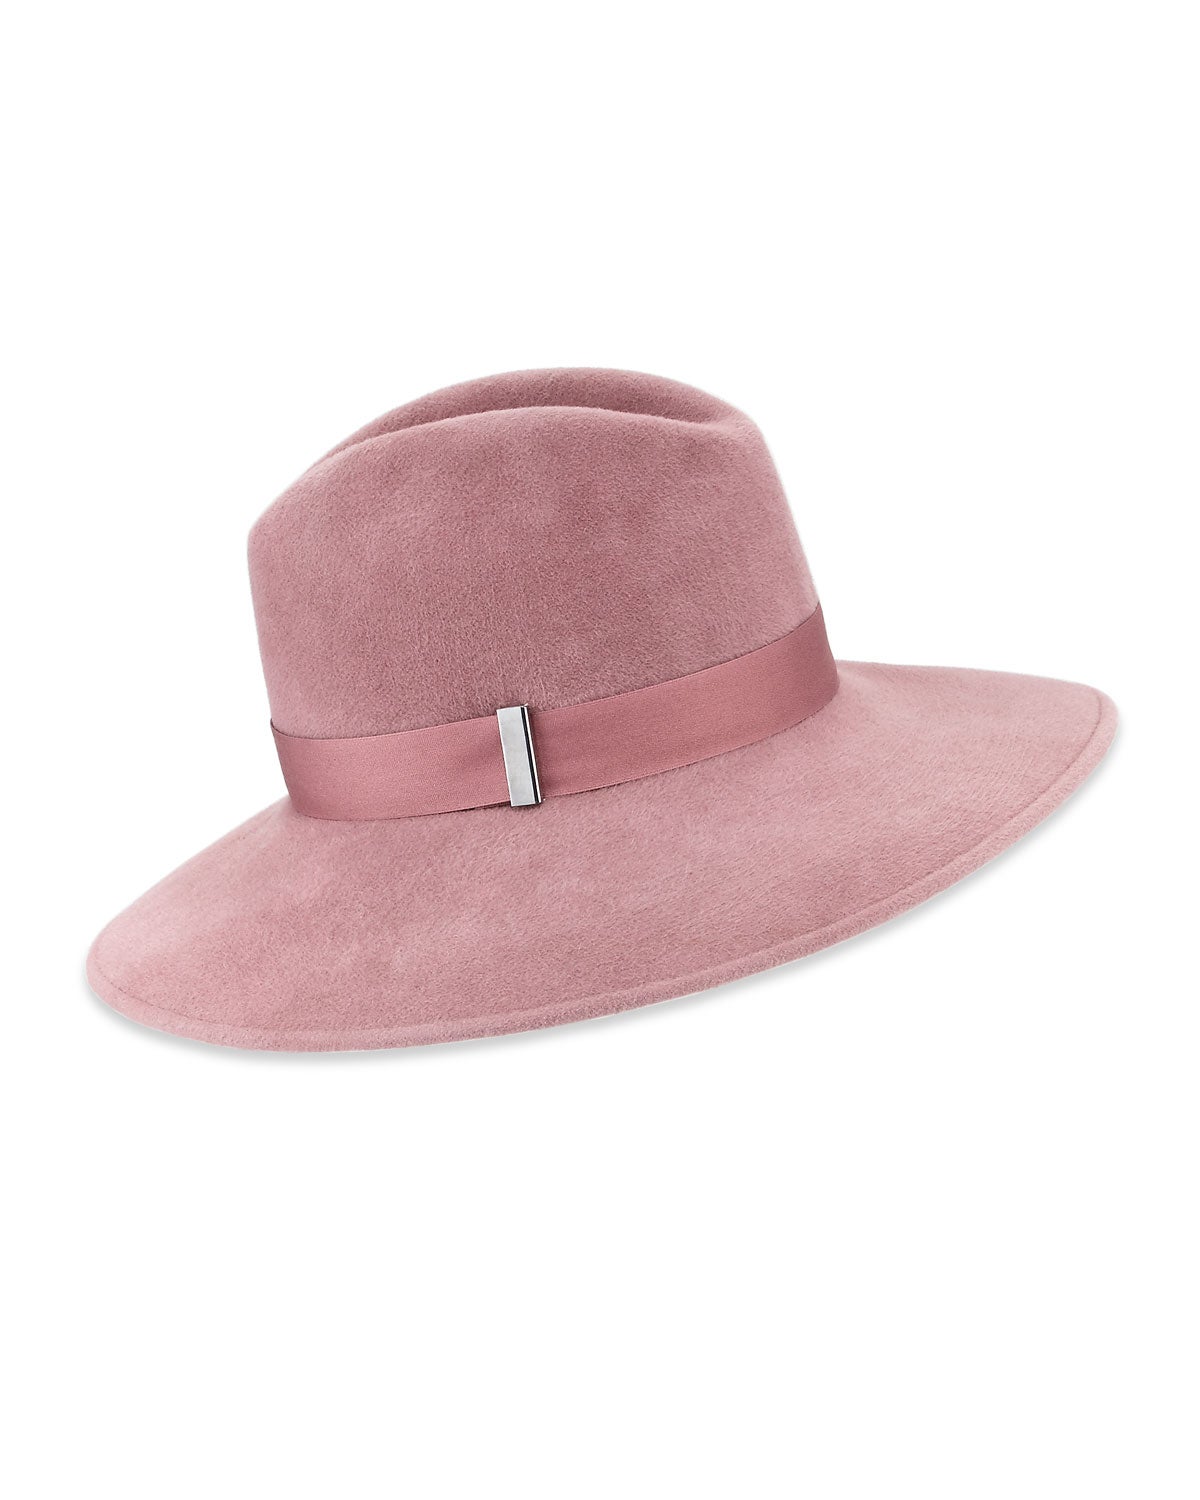 15 Hats You'll Want to Wear Even When Your Hair is Laid
